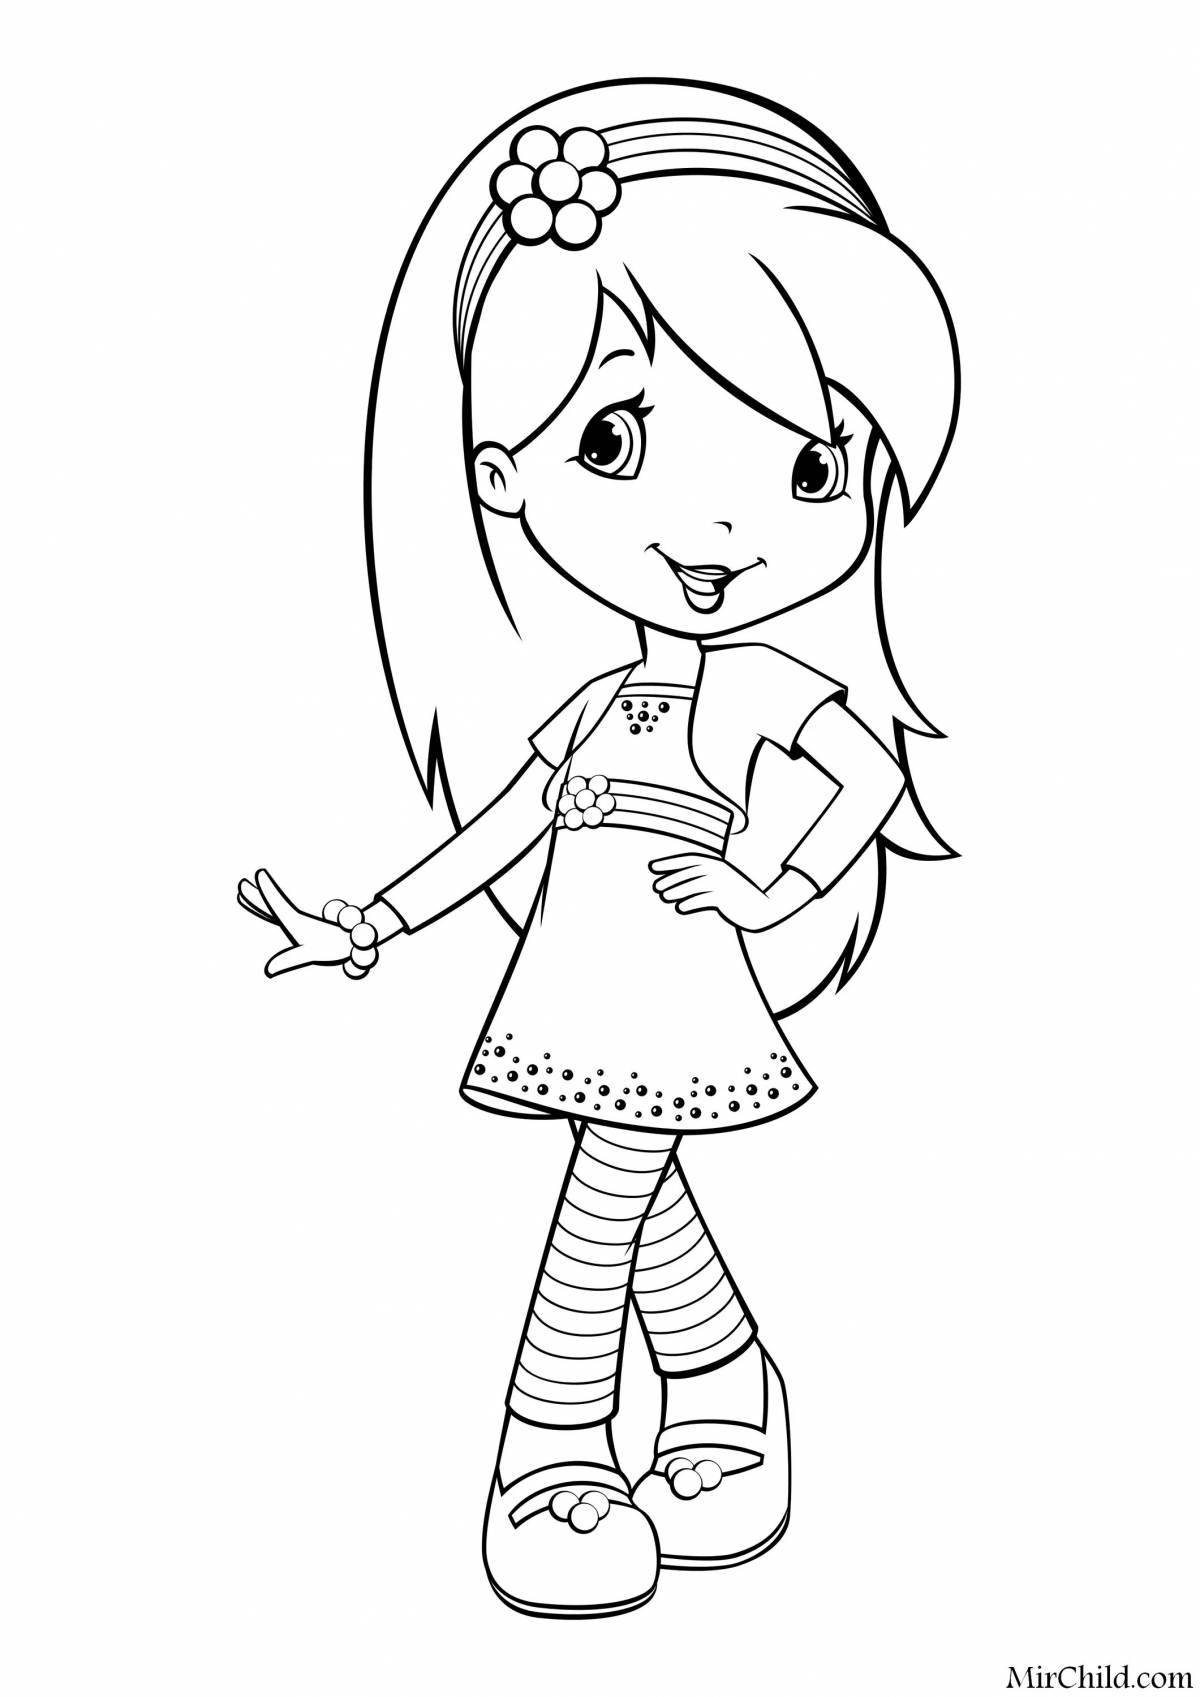 Colorful wildberry coloring page